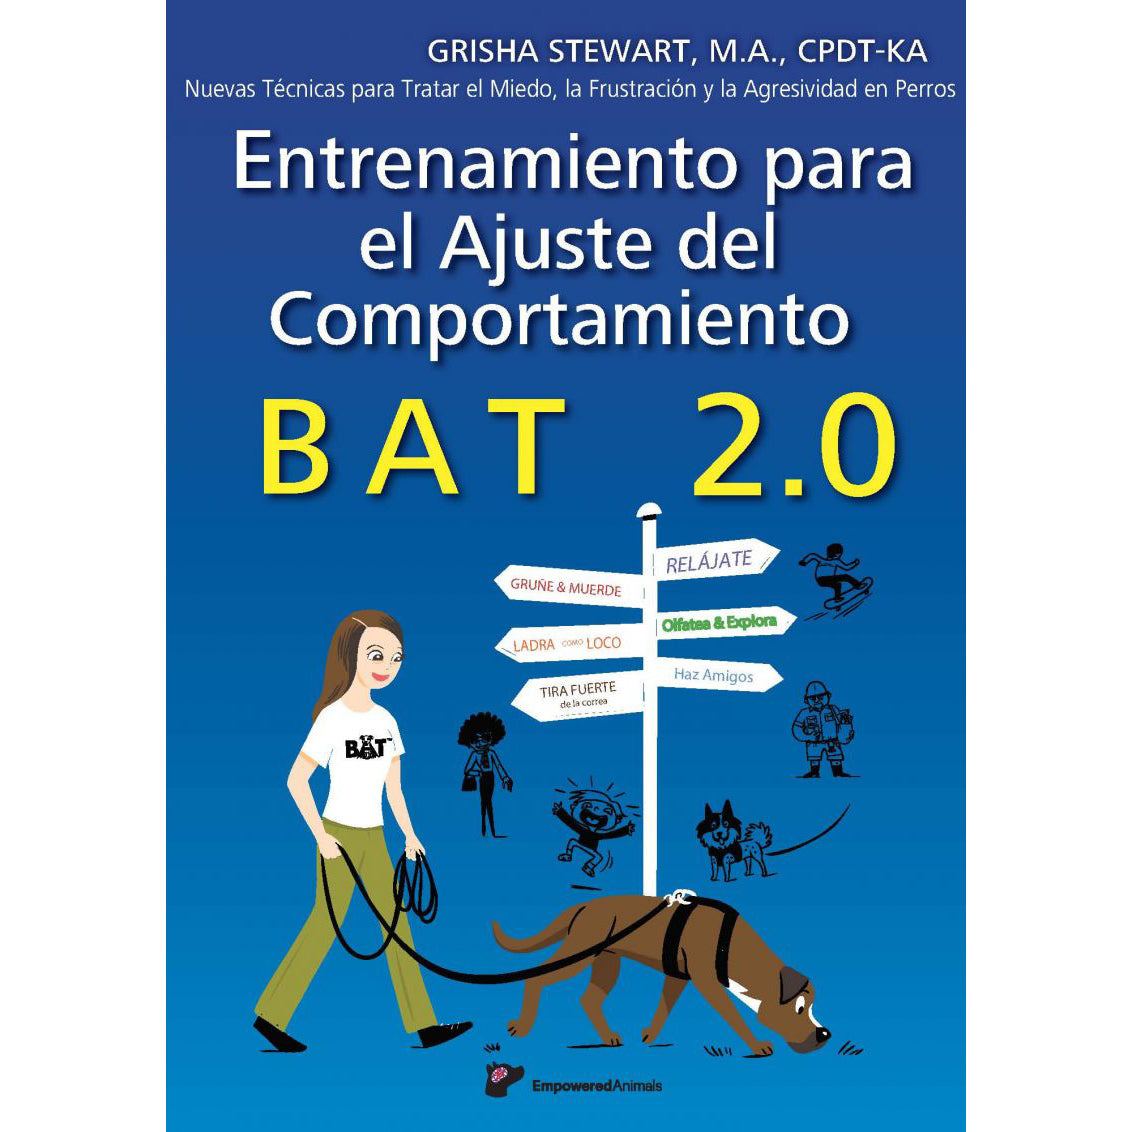 BAT 2.0 Book for Dog Aggression, Frustration, & Fear: Wholesale Orders (Spanish, Sets of 20)